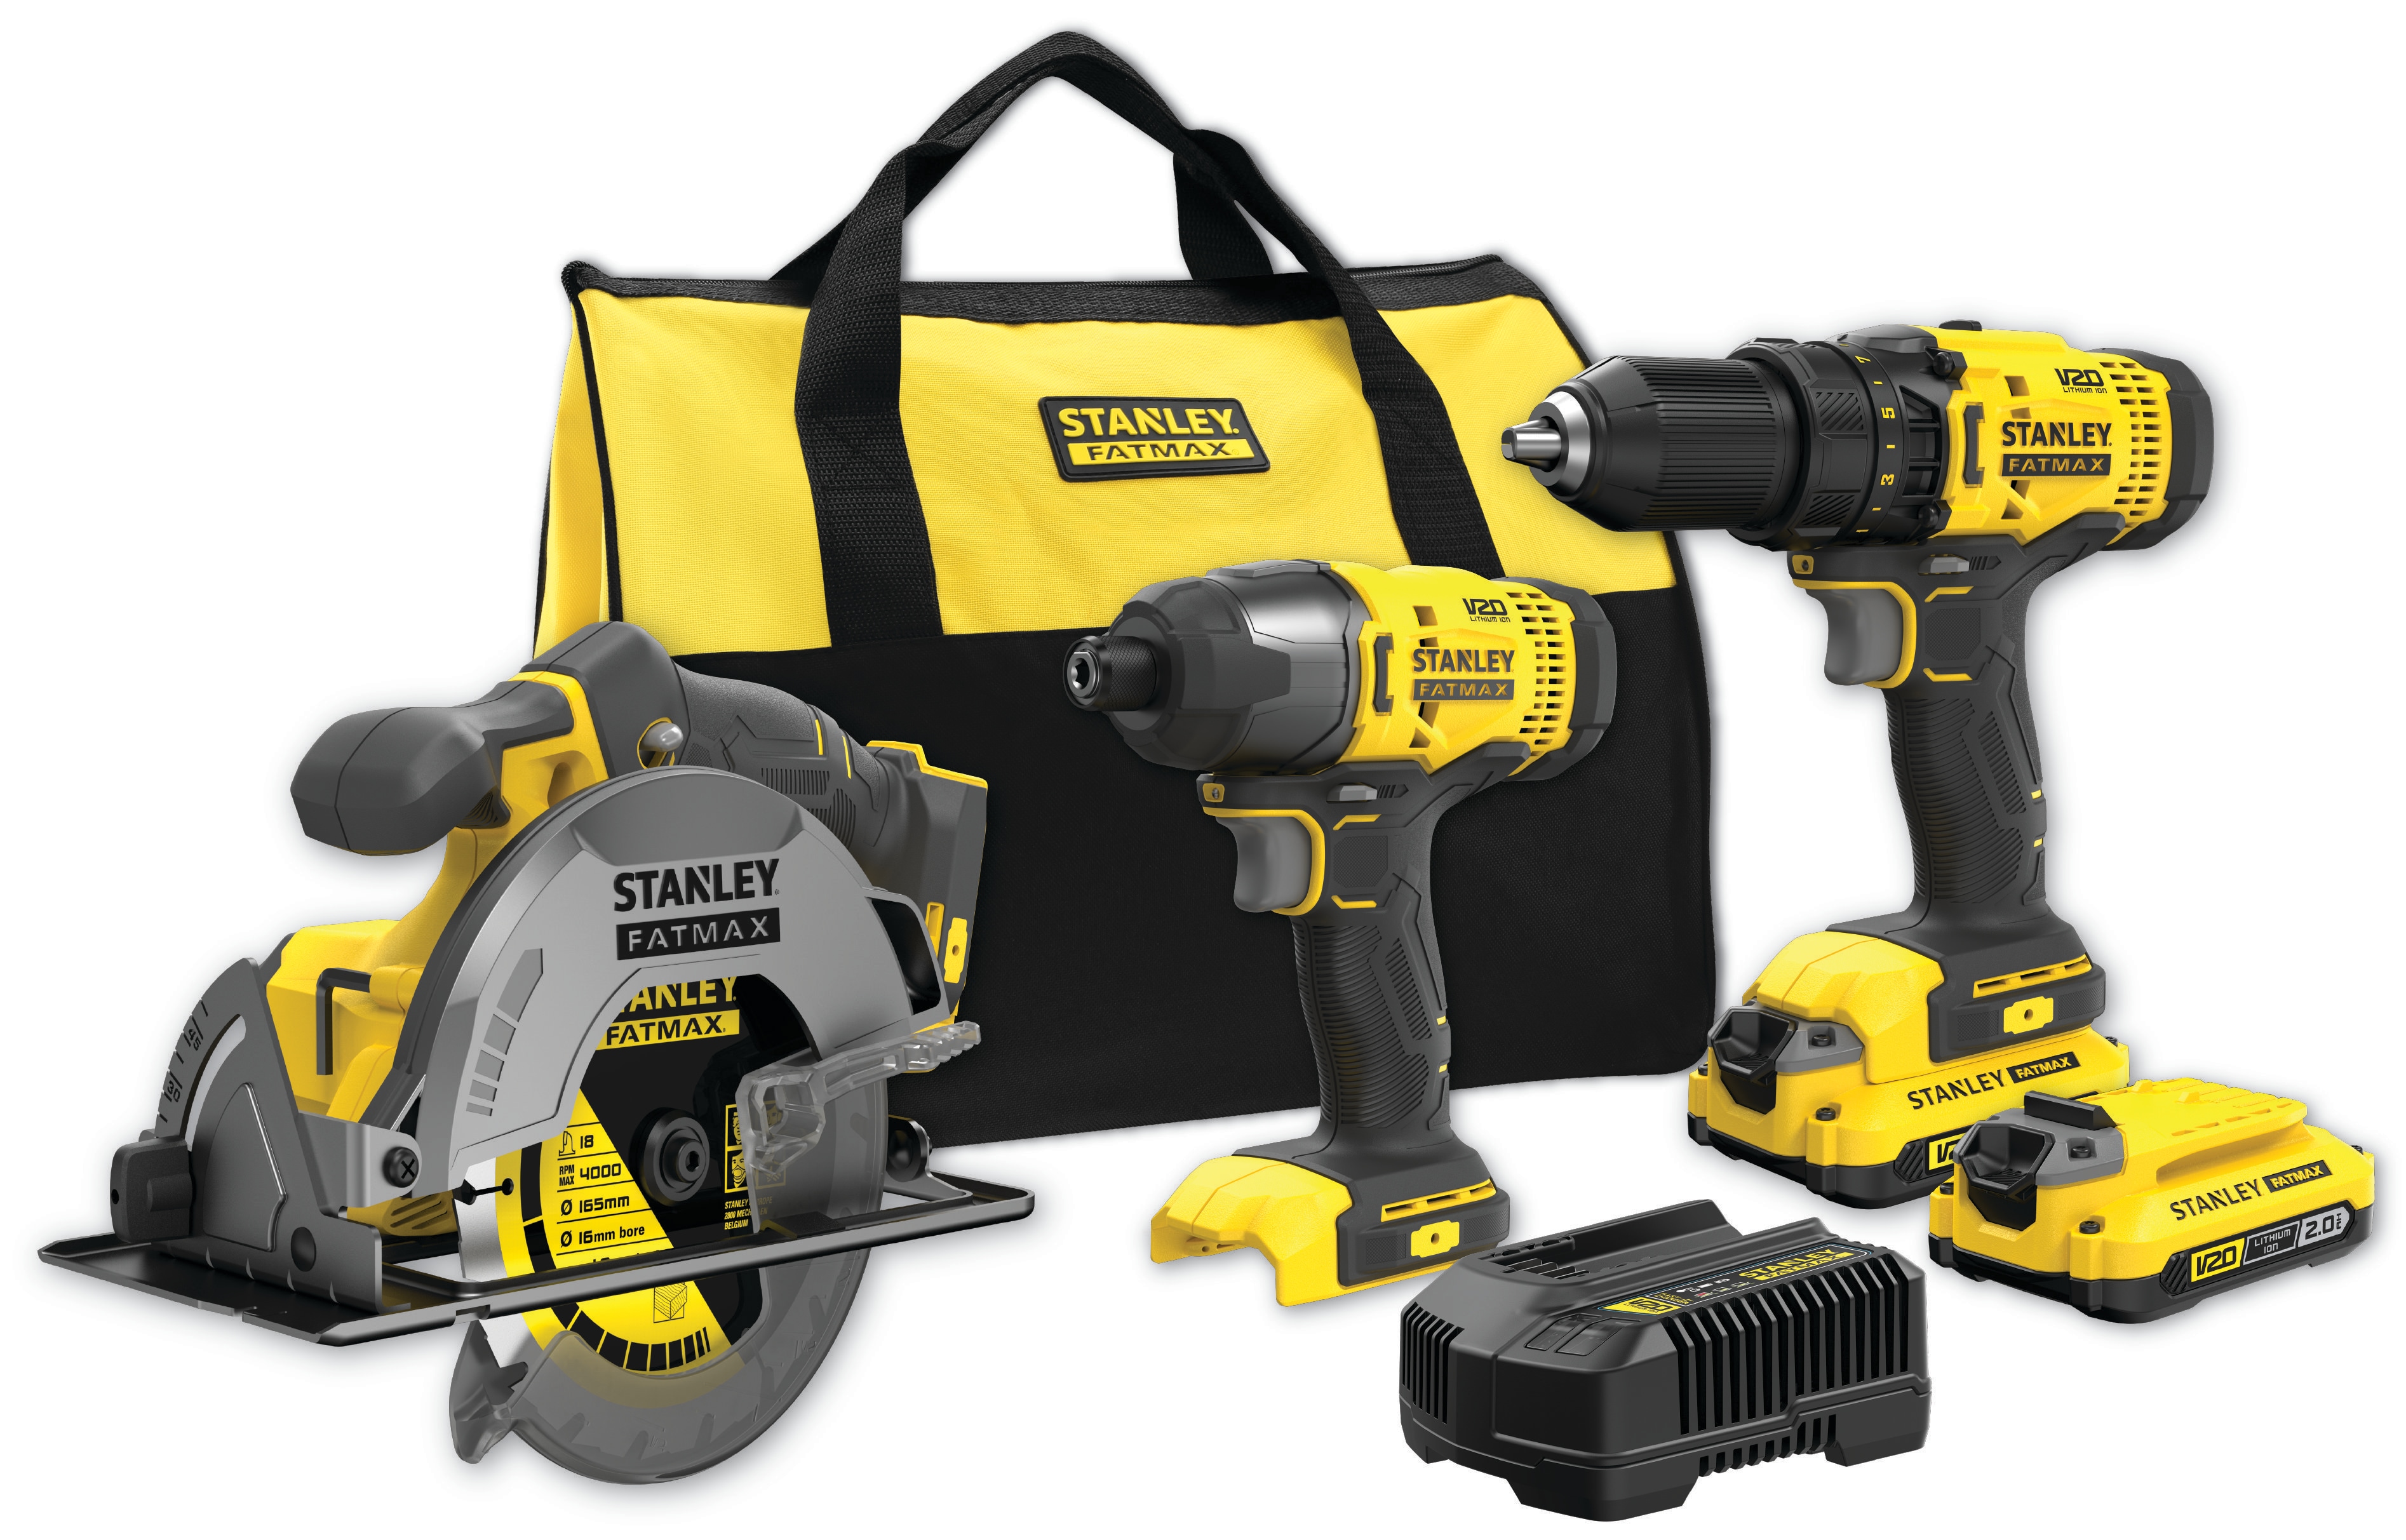 18V STANLEY® FATMAX® V20 COMBO ΣΕΤ 3 ΤΕΜΑΧΙΩΝ ΜΕ 2 X 2.0AH ΜΠΑΤΑΡΙΕΣ ΚΑΙ ΜΑΛΑΚΗ ΤΣΑΝΤΑ 